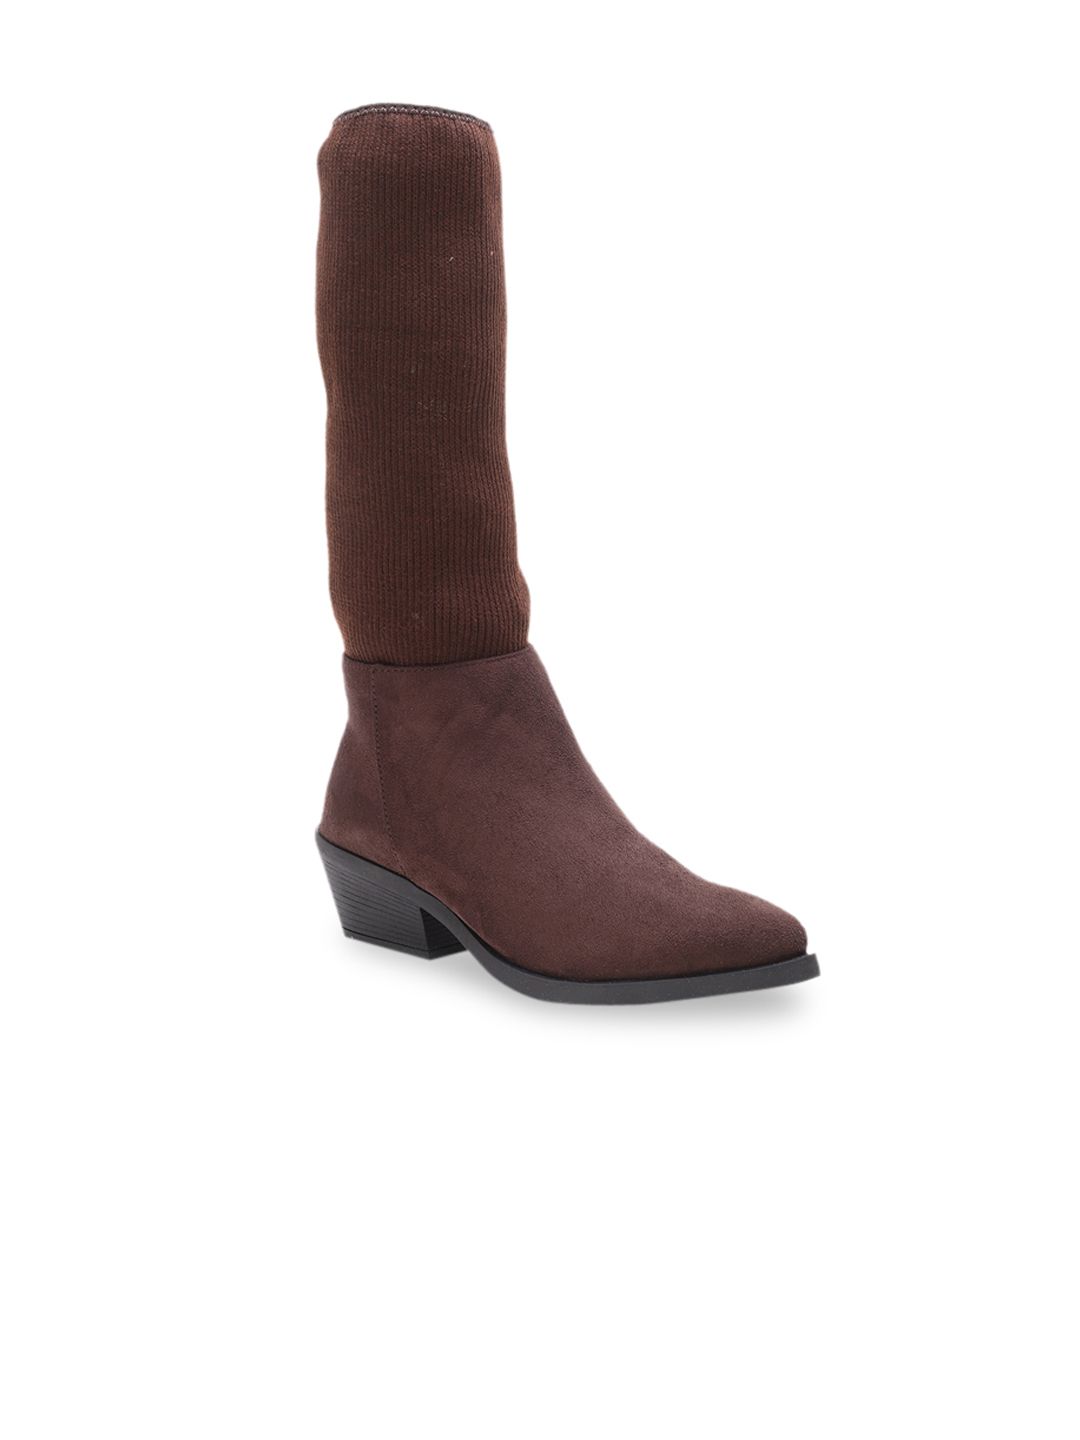 Bruno Manetti Women Brown Solid Suede Heeled Boots Price in India